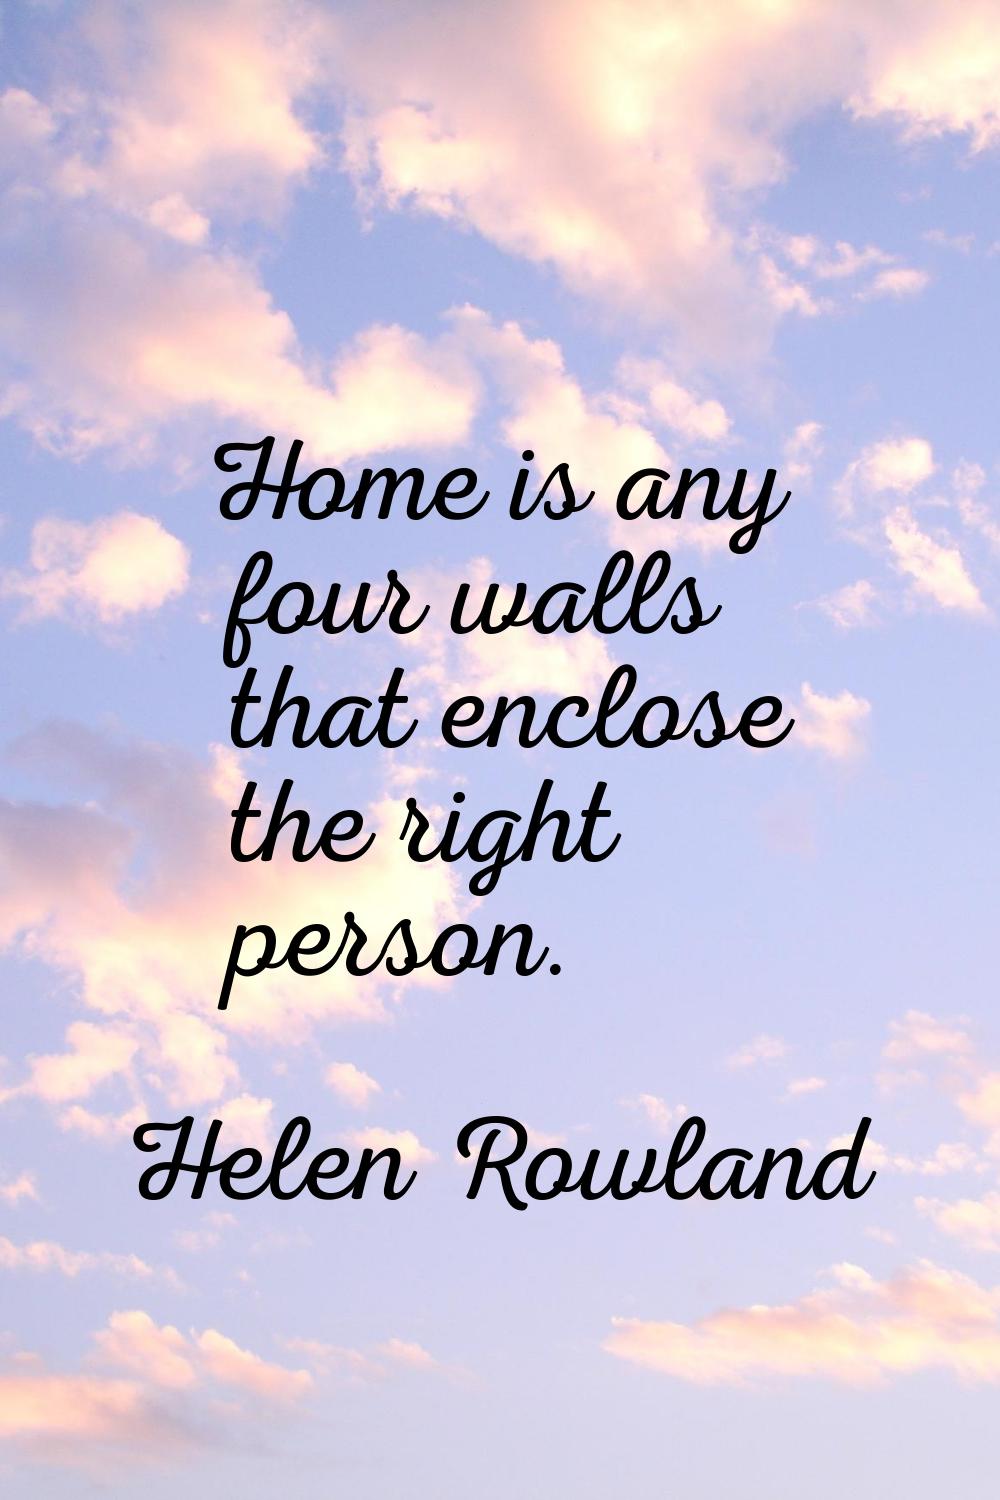 Home is any four walls that enclose the right person.